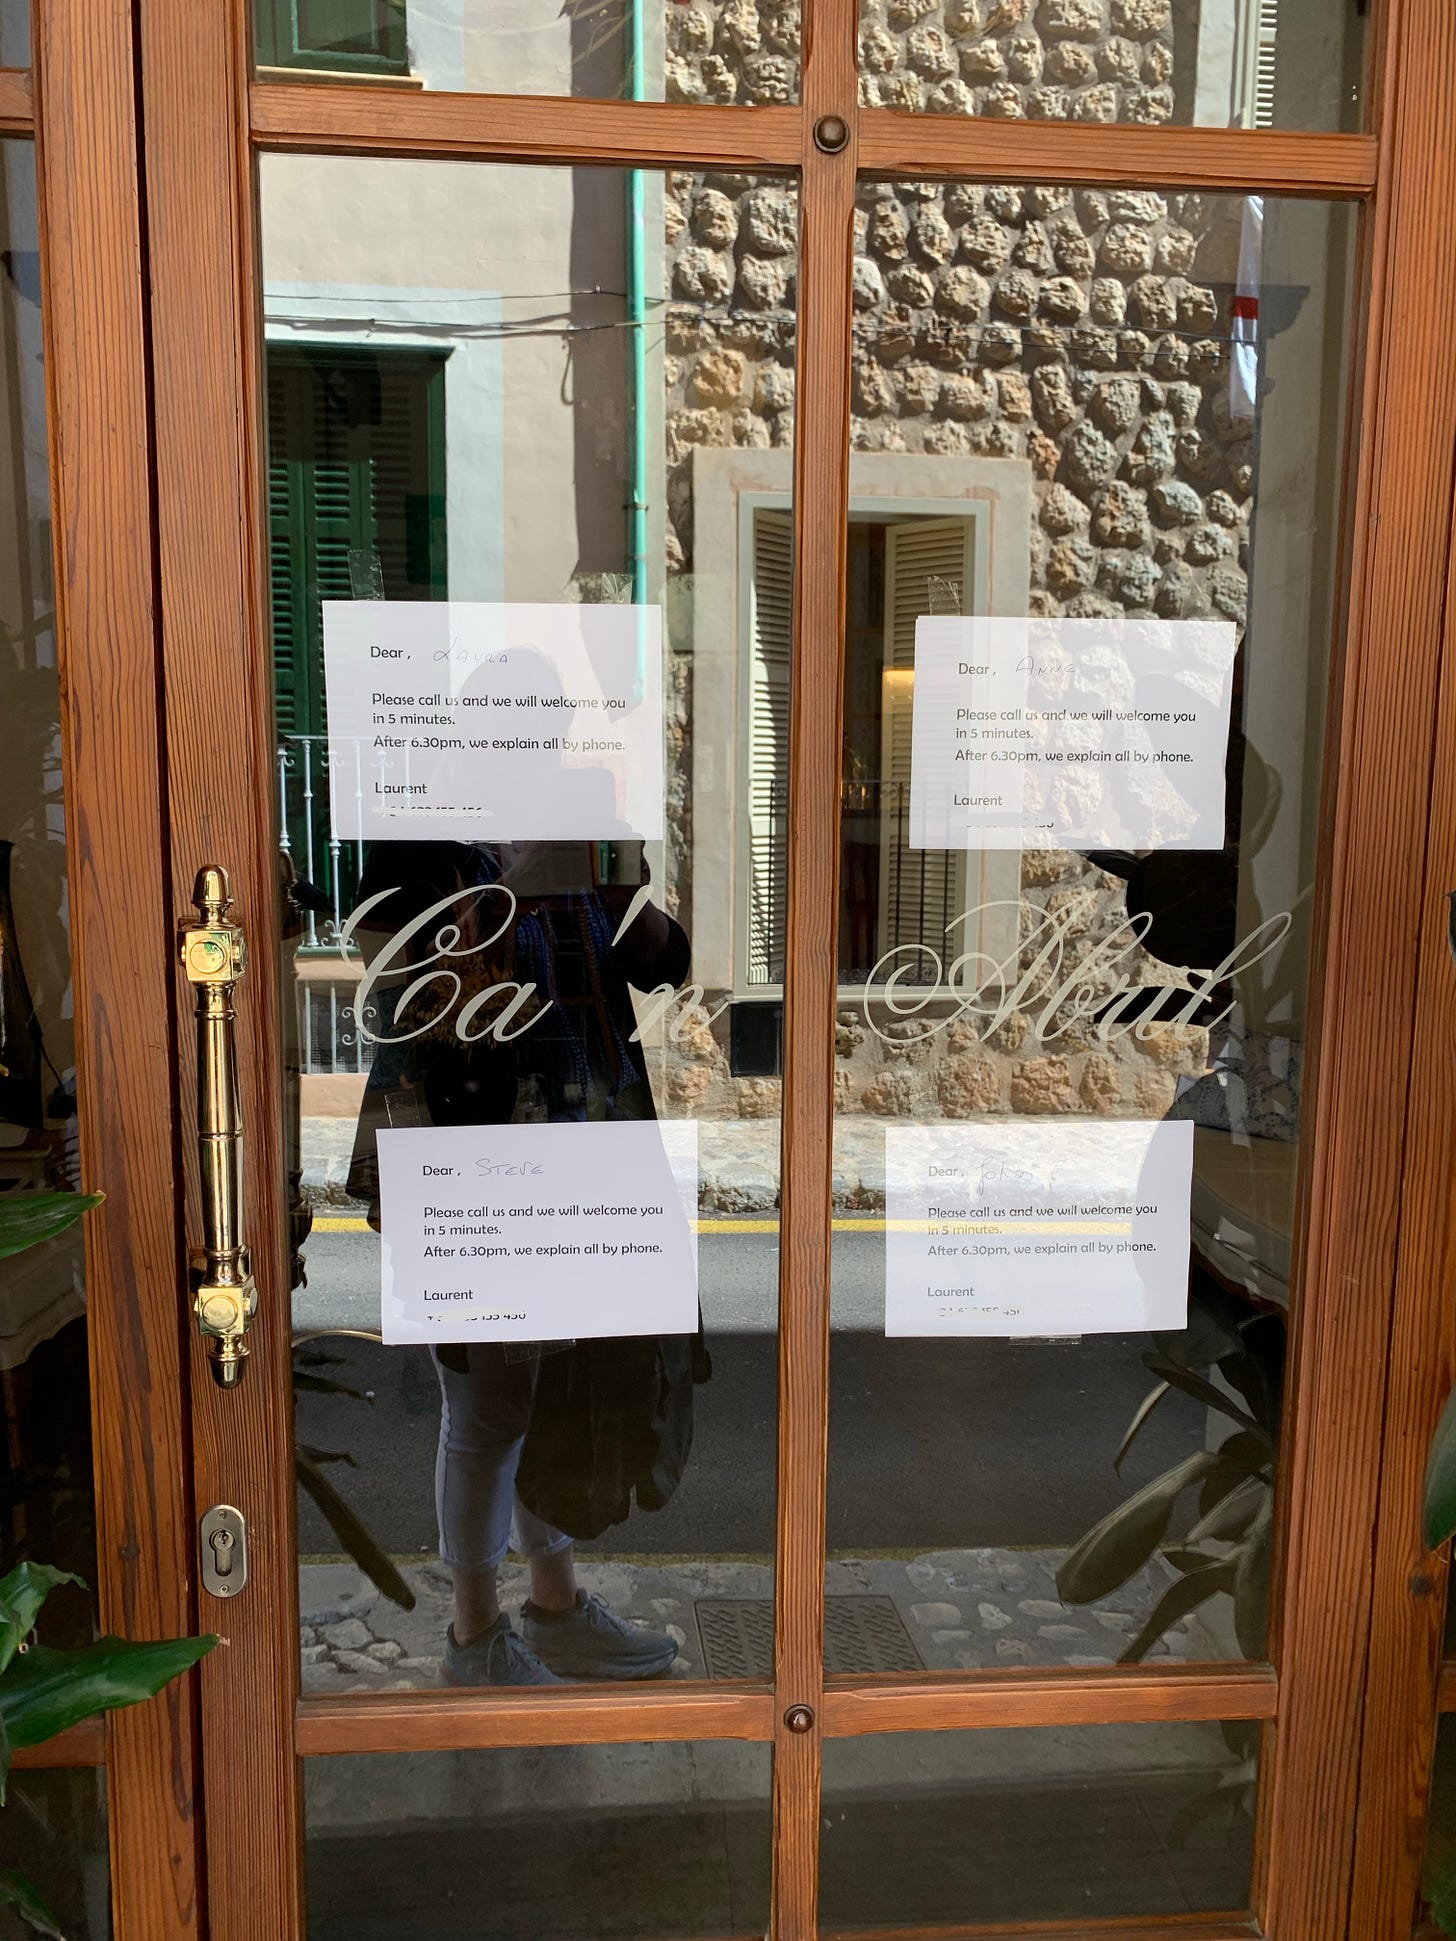 A hotel door with several signs for guests on it explaining that they need to call for assistance as no one is there.